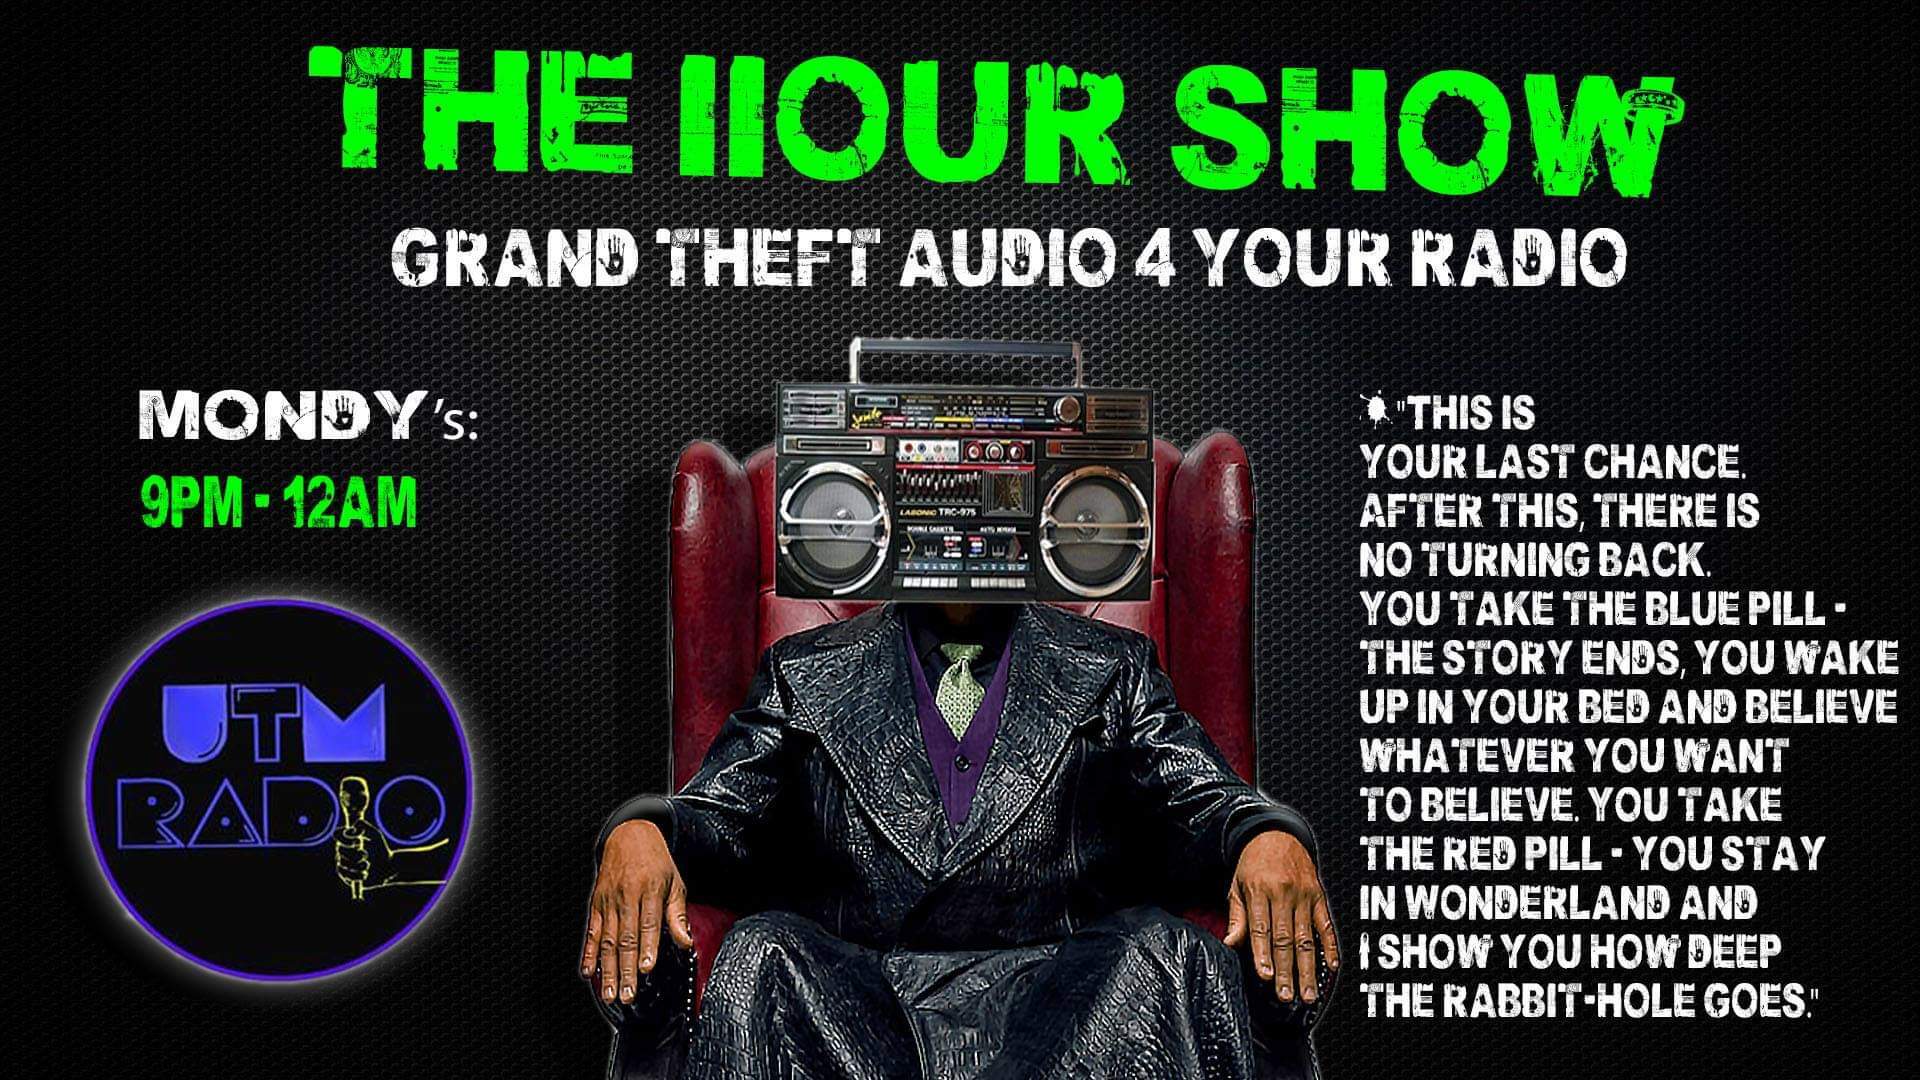 The iiourshowuncut‘s Podcast